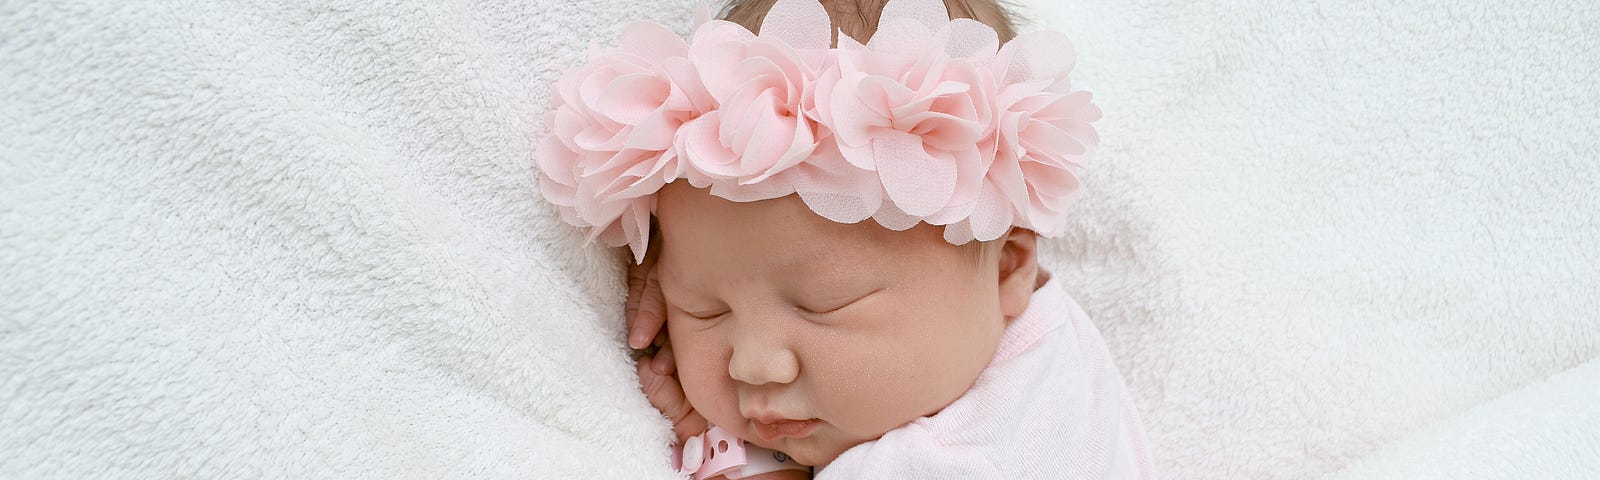 New born baby girl lying between white sheets with pink bow in her hair.